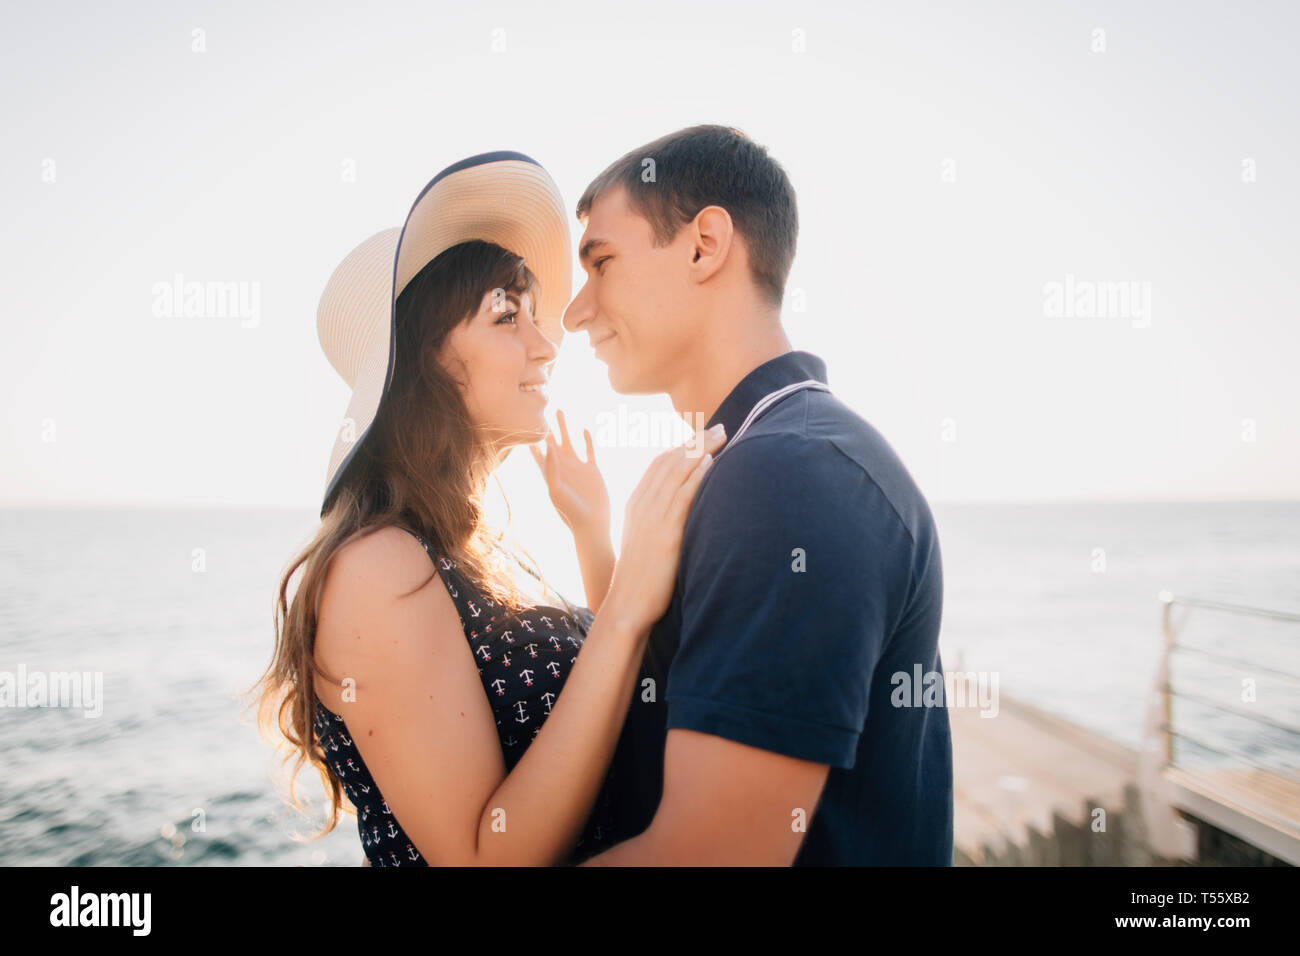 Young couple on pier Stock Photo